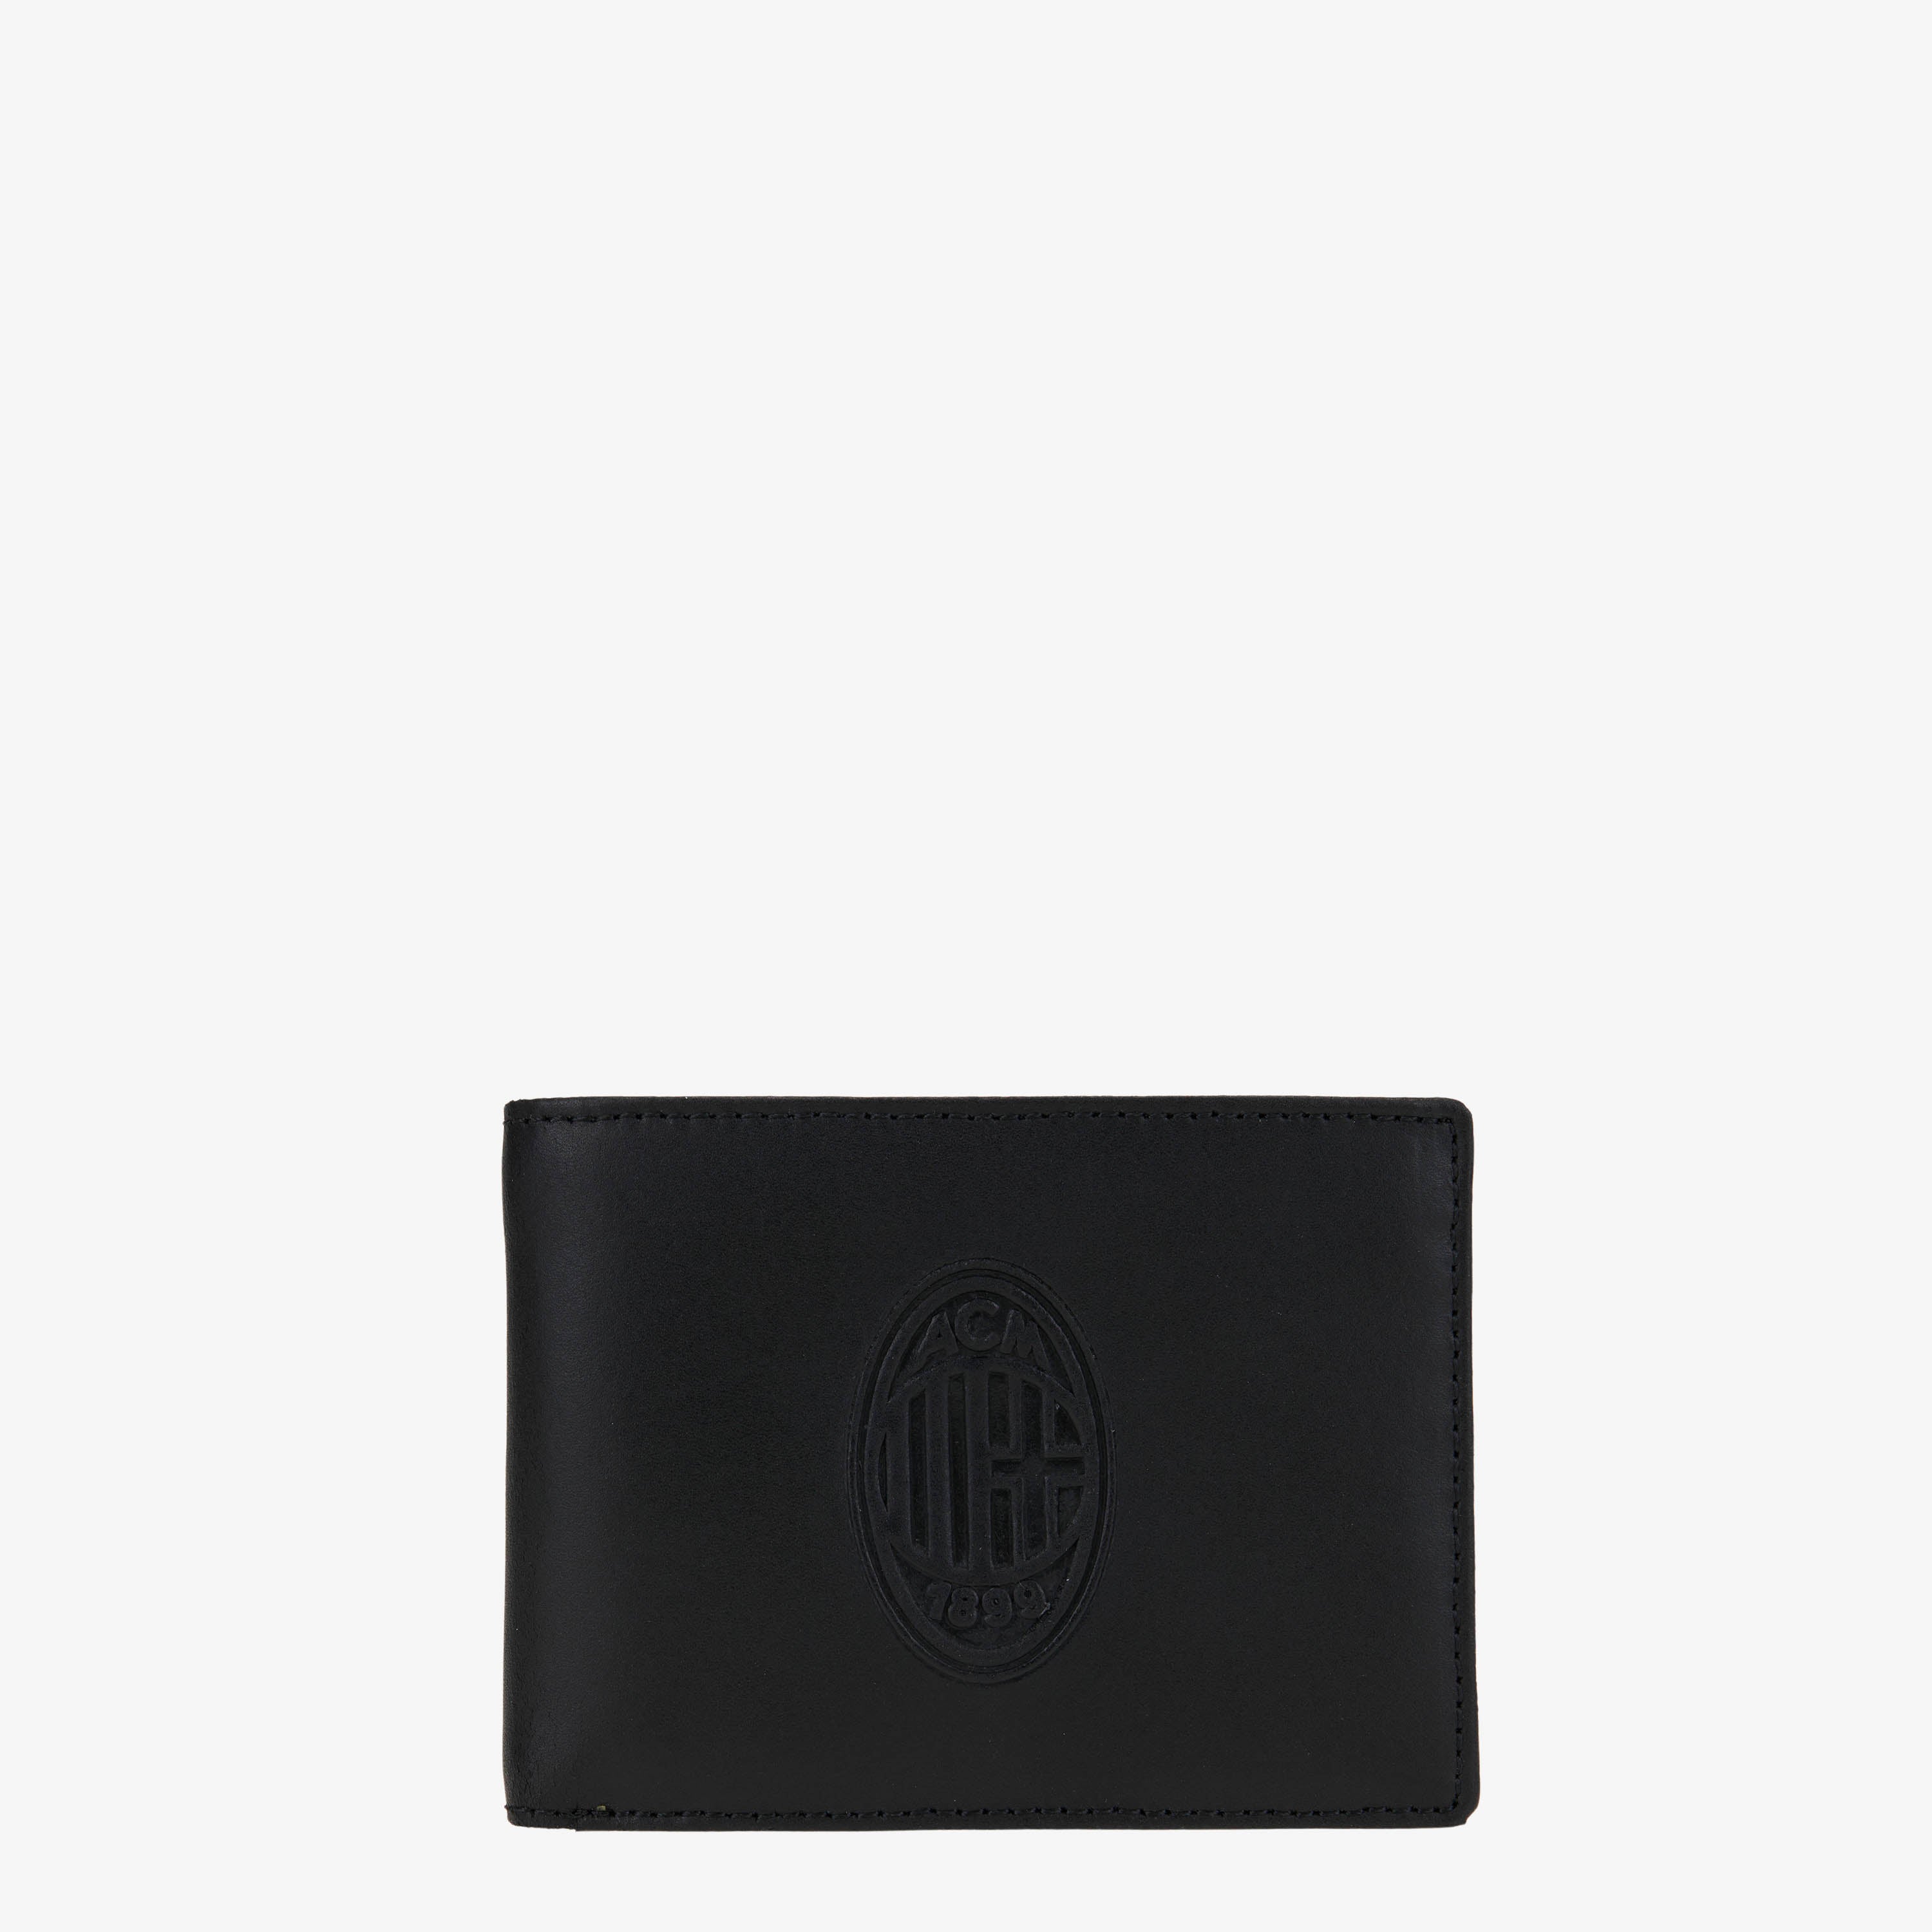 Ac Milan Wallets and Cardholders | Buy on AC Milan Store